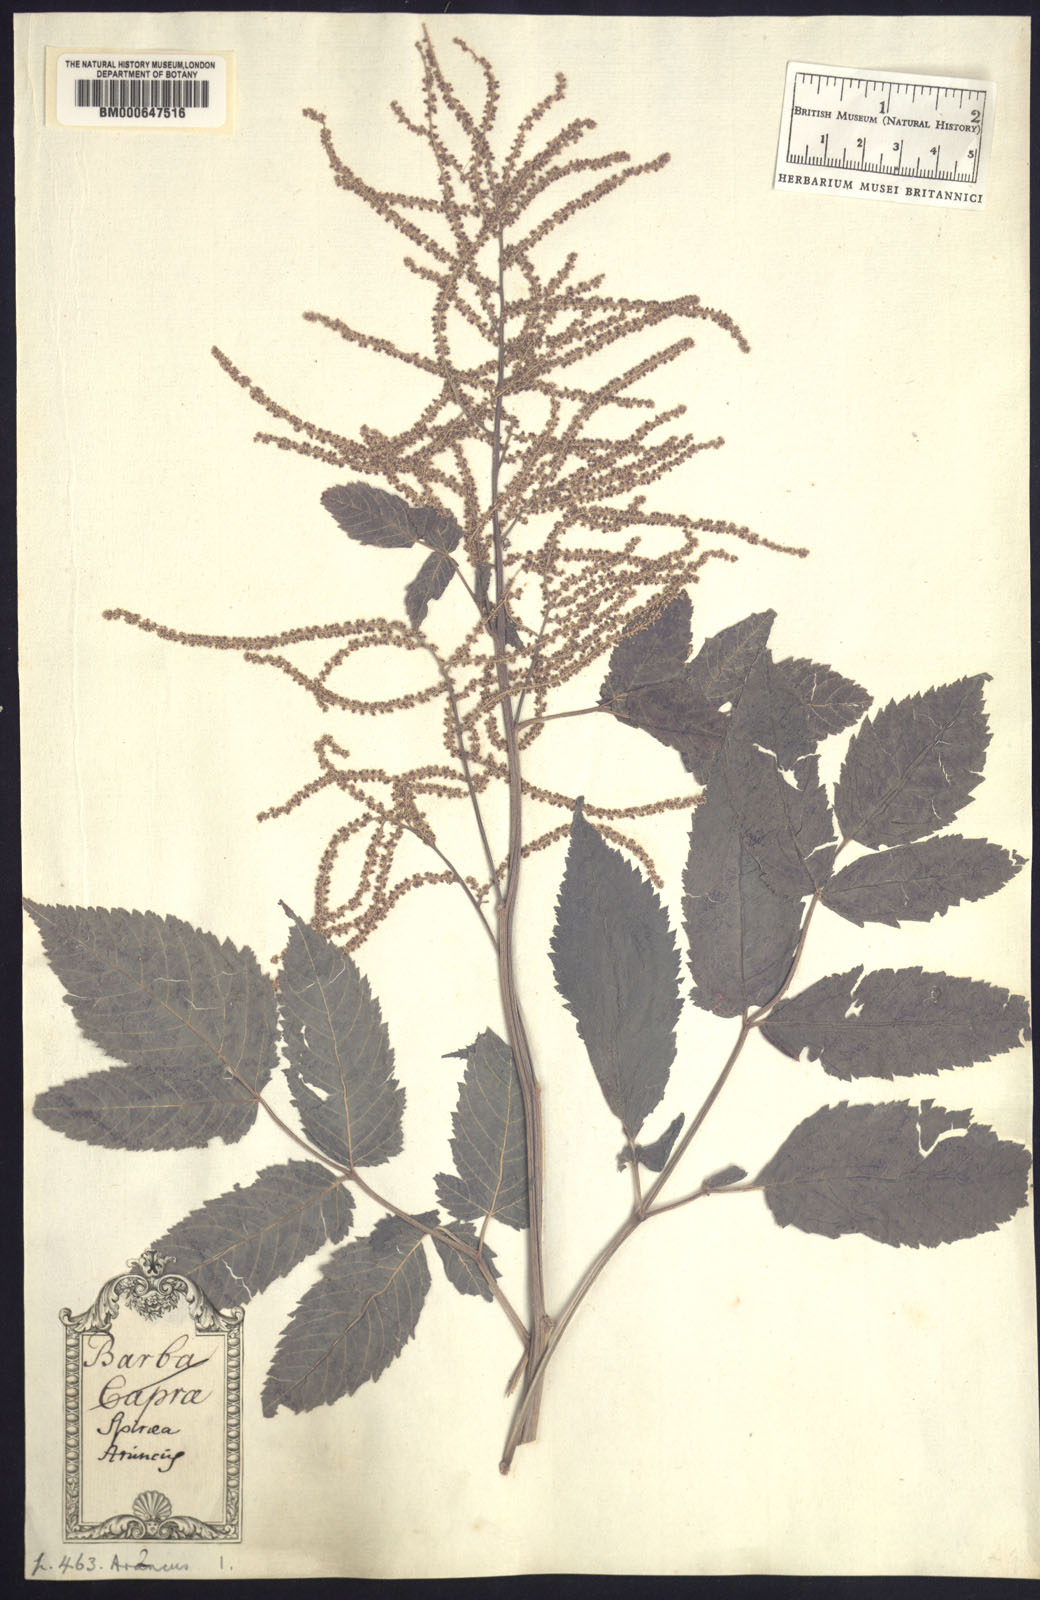 http://www.nhm.ac.uk//resources/research-curation/projects/clifford-herbarium/lgimages/BM000647516.JPG